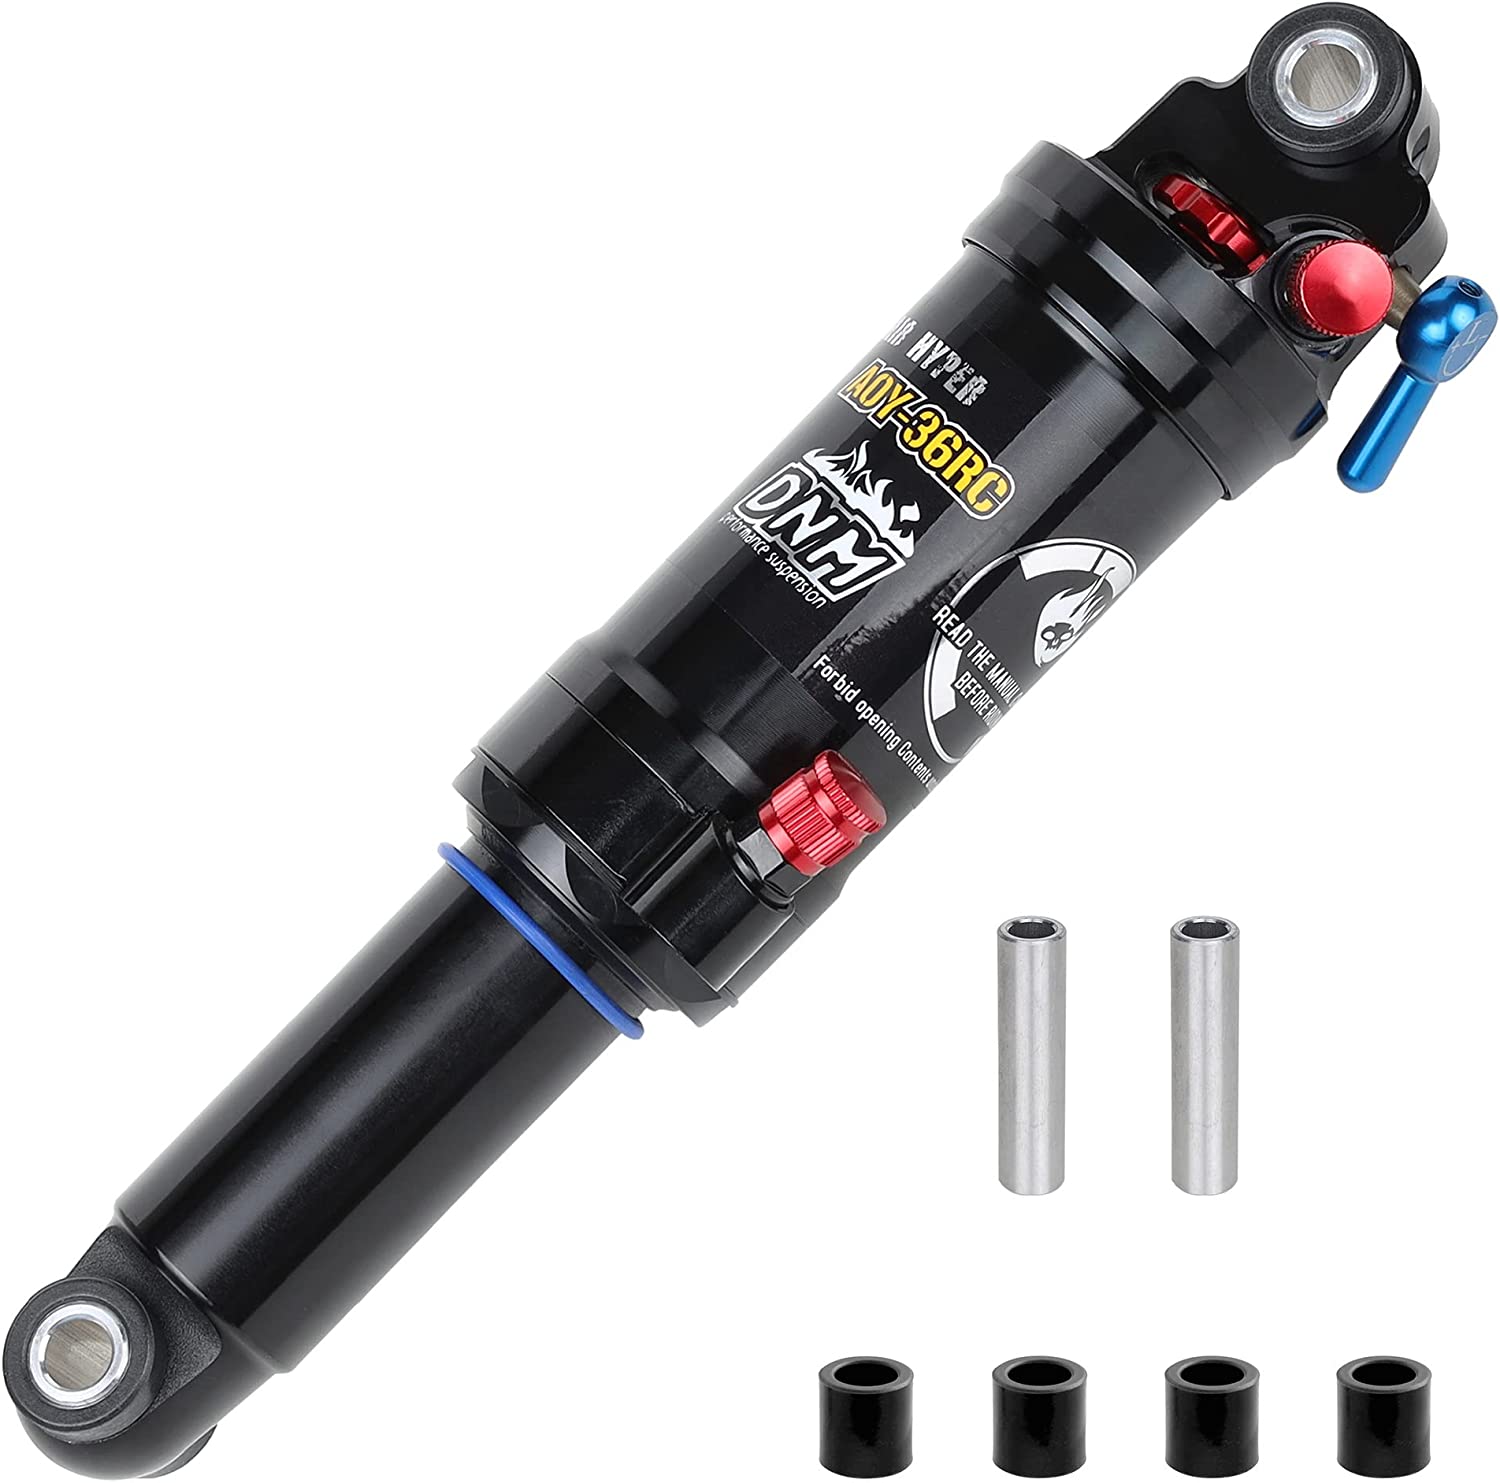 DNM Damping 3 System Mountain Bike Air Rear Shock Rebound/Lock Out/Air Pressure Adjustable Used in I7PRO